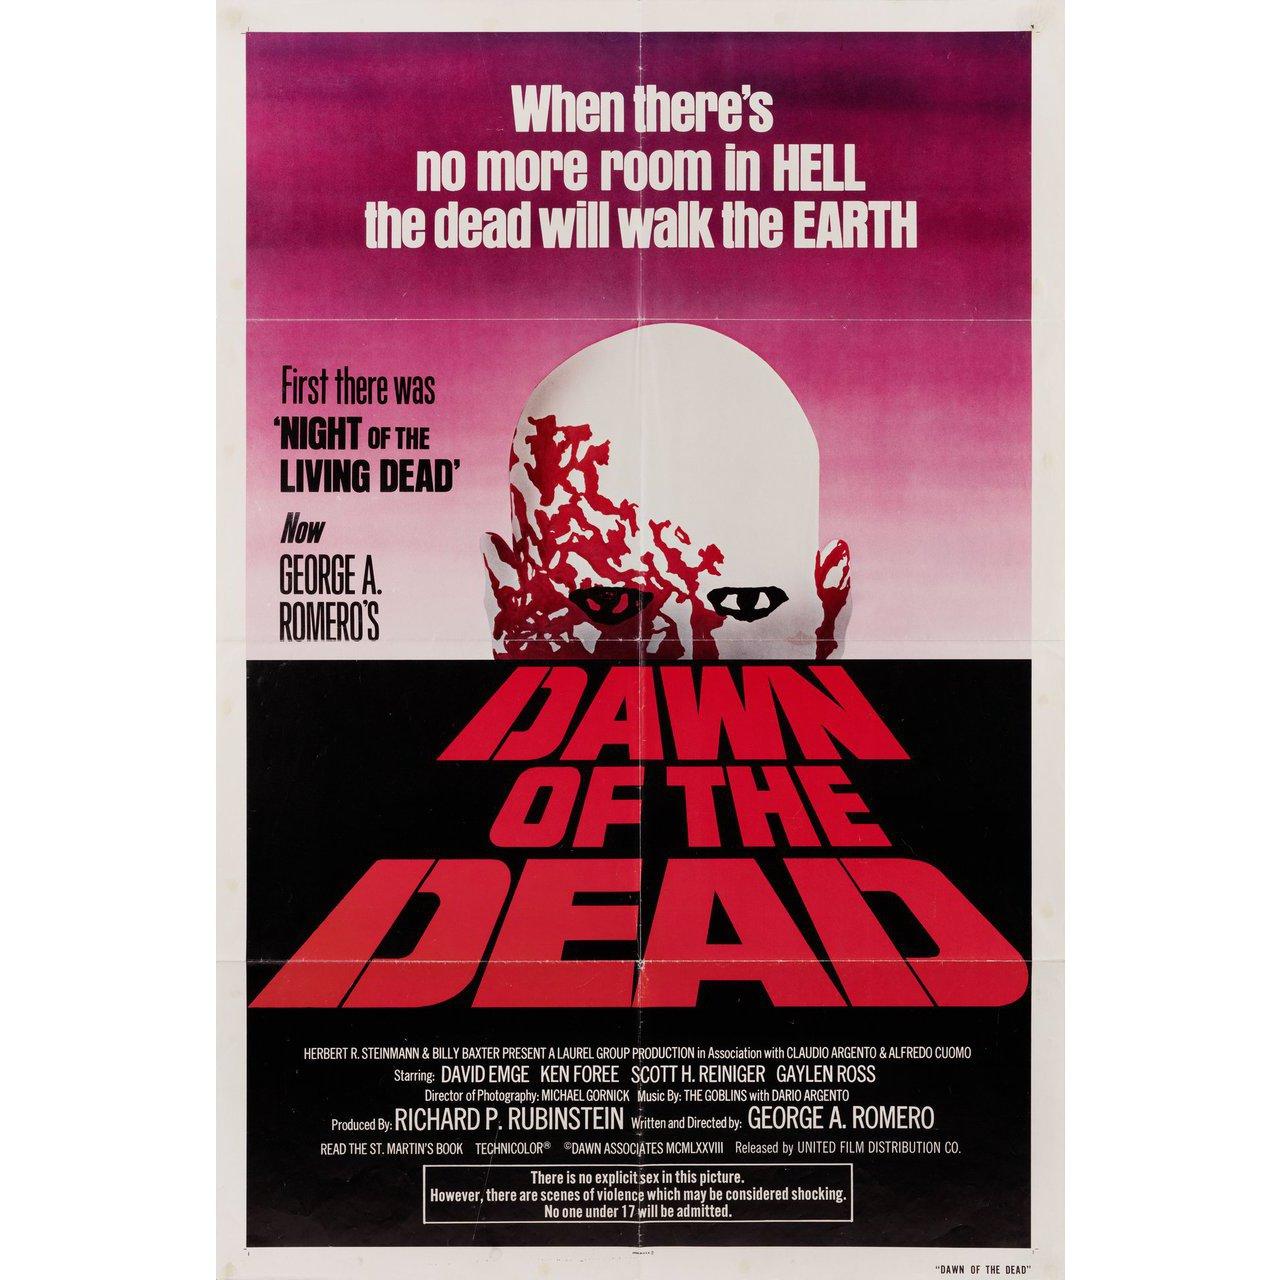 Original 1979 U.S. one sheet poster for the film Dawn of the Dead directed by George A. Romero with David Emge / Ken Foree / Scott H. Reiniger / Gaylen Ross. Very Good condition, folded with pinholes & other wear. Many original posters were issued